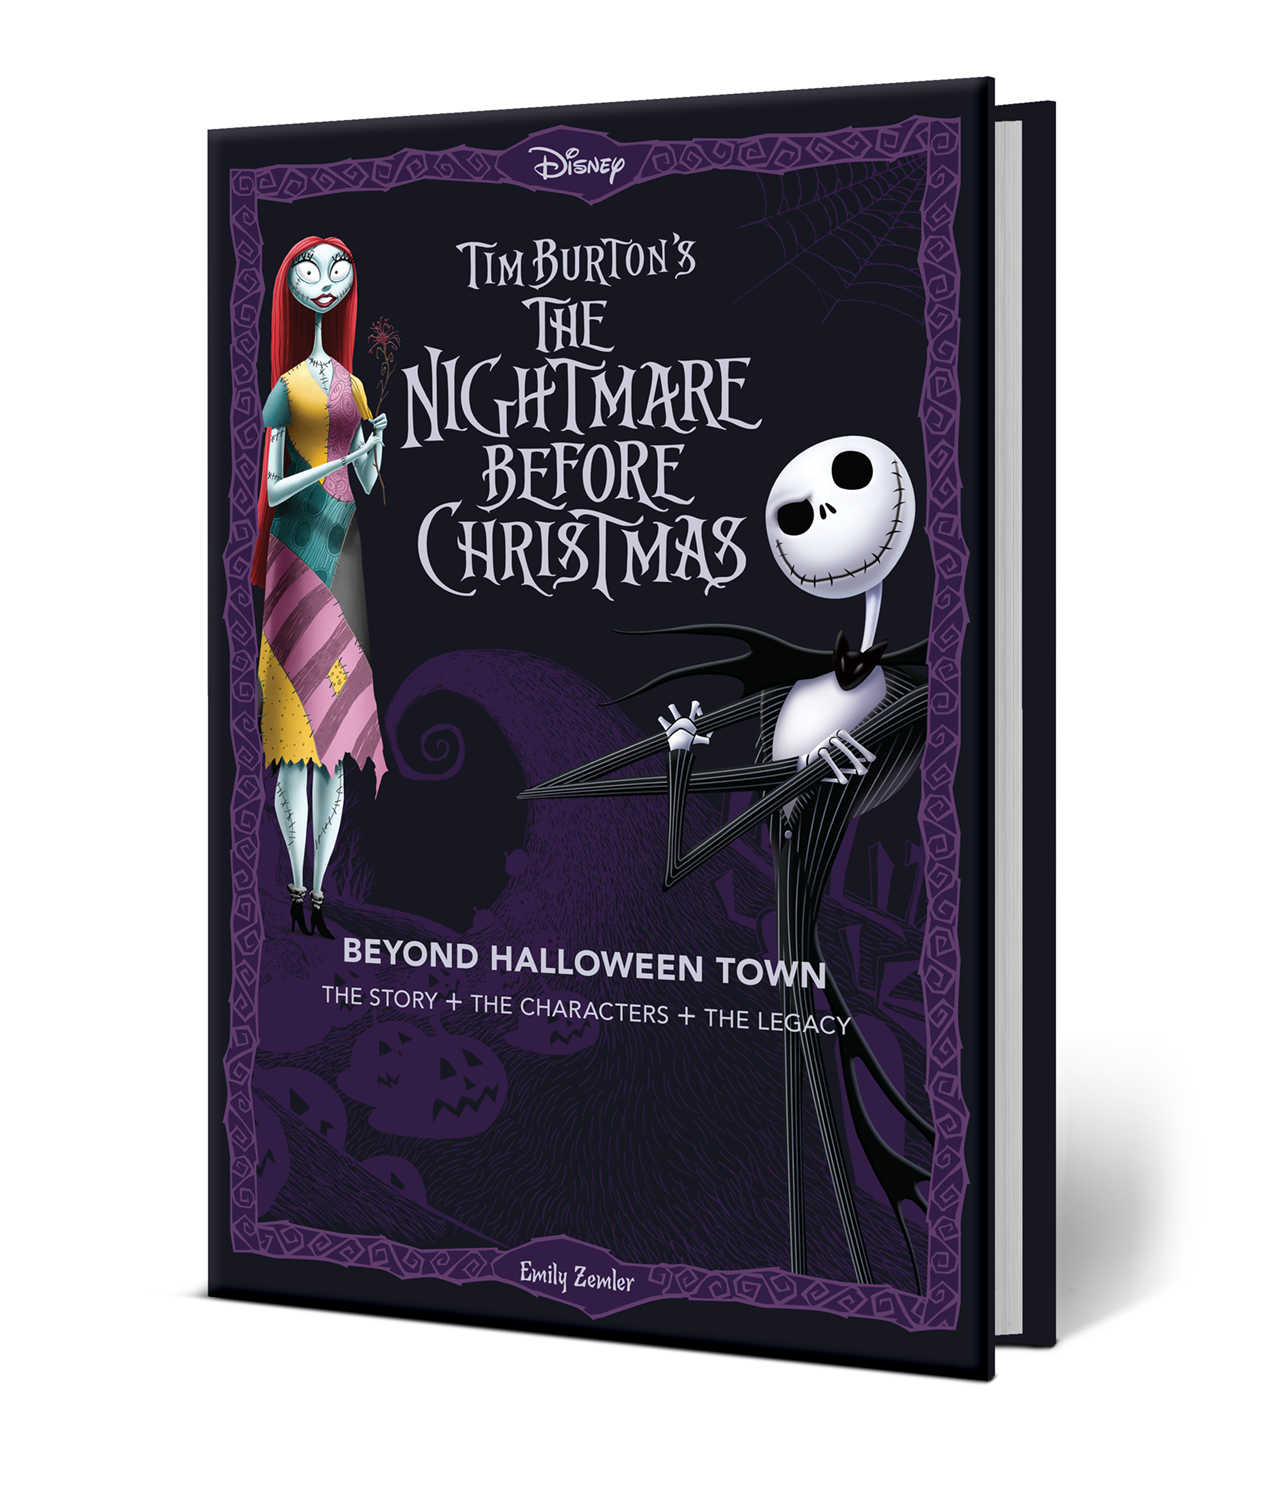 Discover the secrets behind the making of Tim Burton's beloved stop-motion classic in this in-depth look at the film's characters, places, and themes. With exclusive interviews, concept art, and behind-the-scenes photos, Beyond Halloween Town is the ultimate guide for fans of The Nightmare Before Christmas.